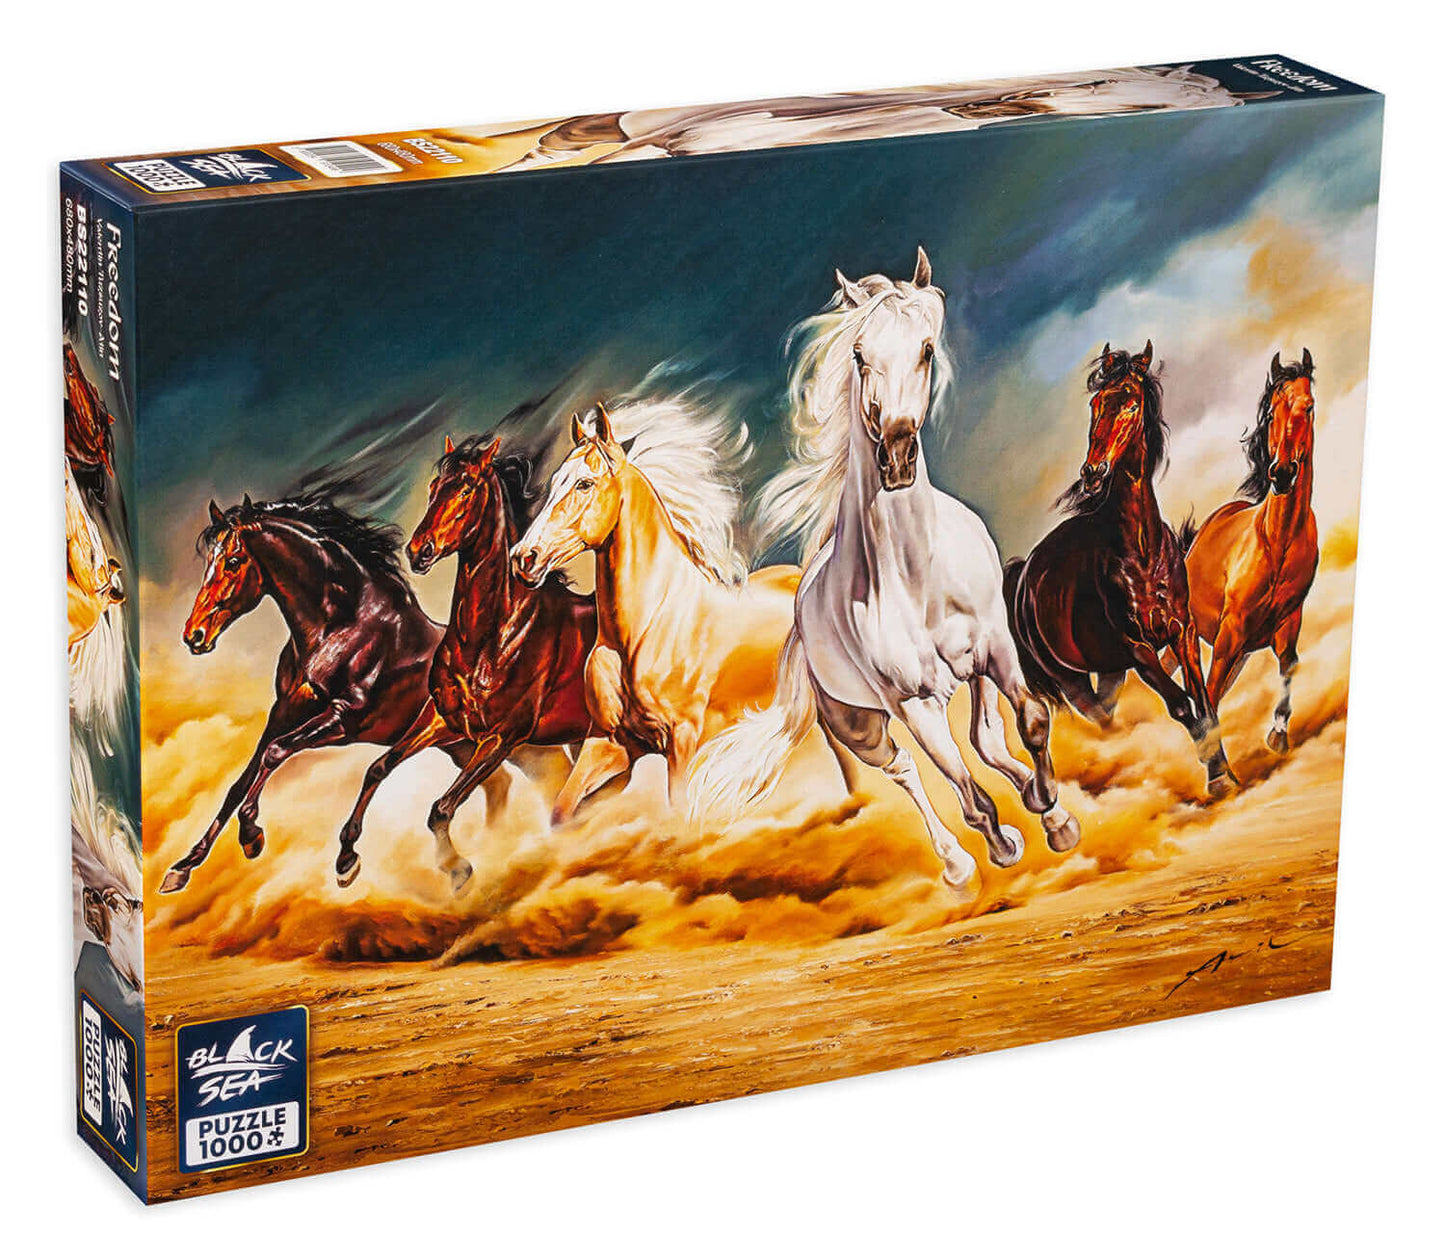 Puzzle Black Sea 1000 pieces - Free, Freedom is what matters most for wild horses. The determination and defiance of these aristocratic animals have always evoked people’s admiration. They are the proof that free will is one of the most precious qualities